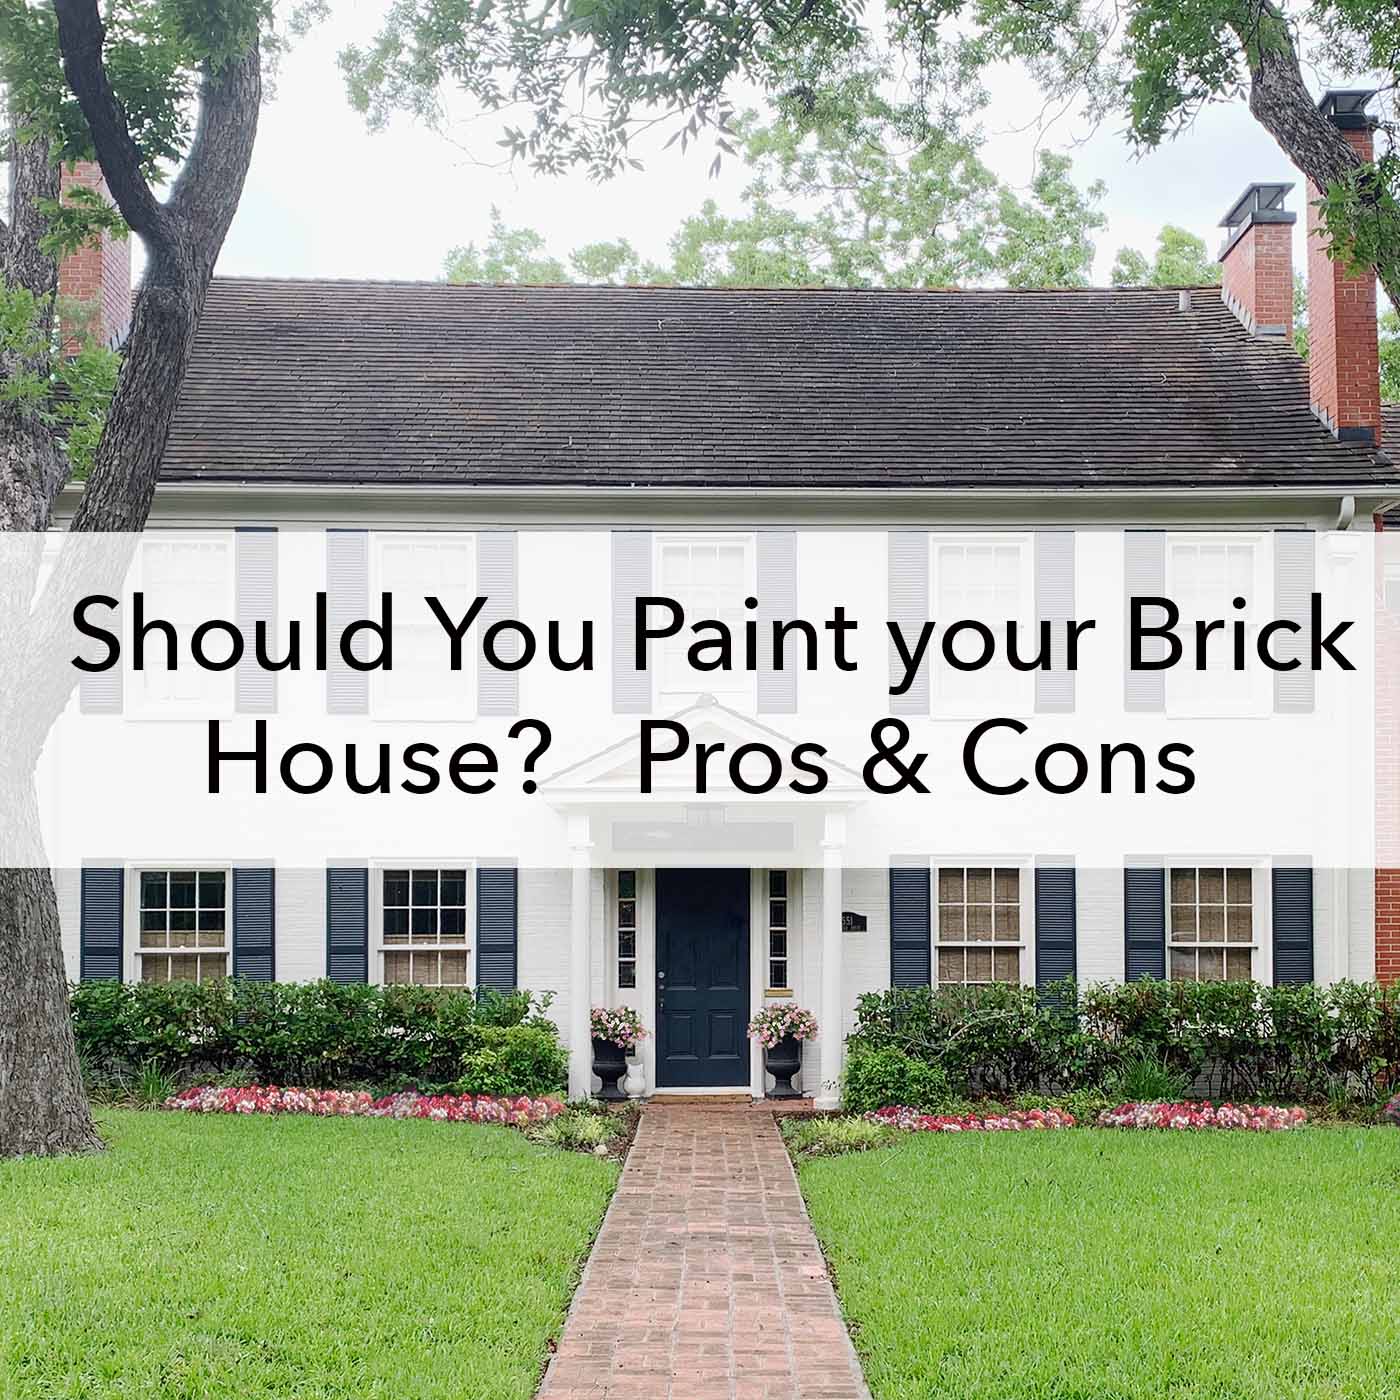 Should You Paint your Brick House, Pros and Cons